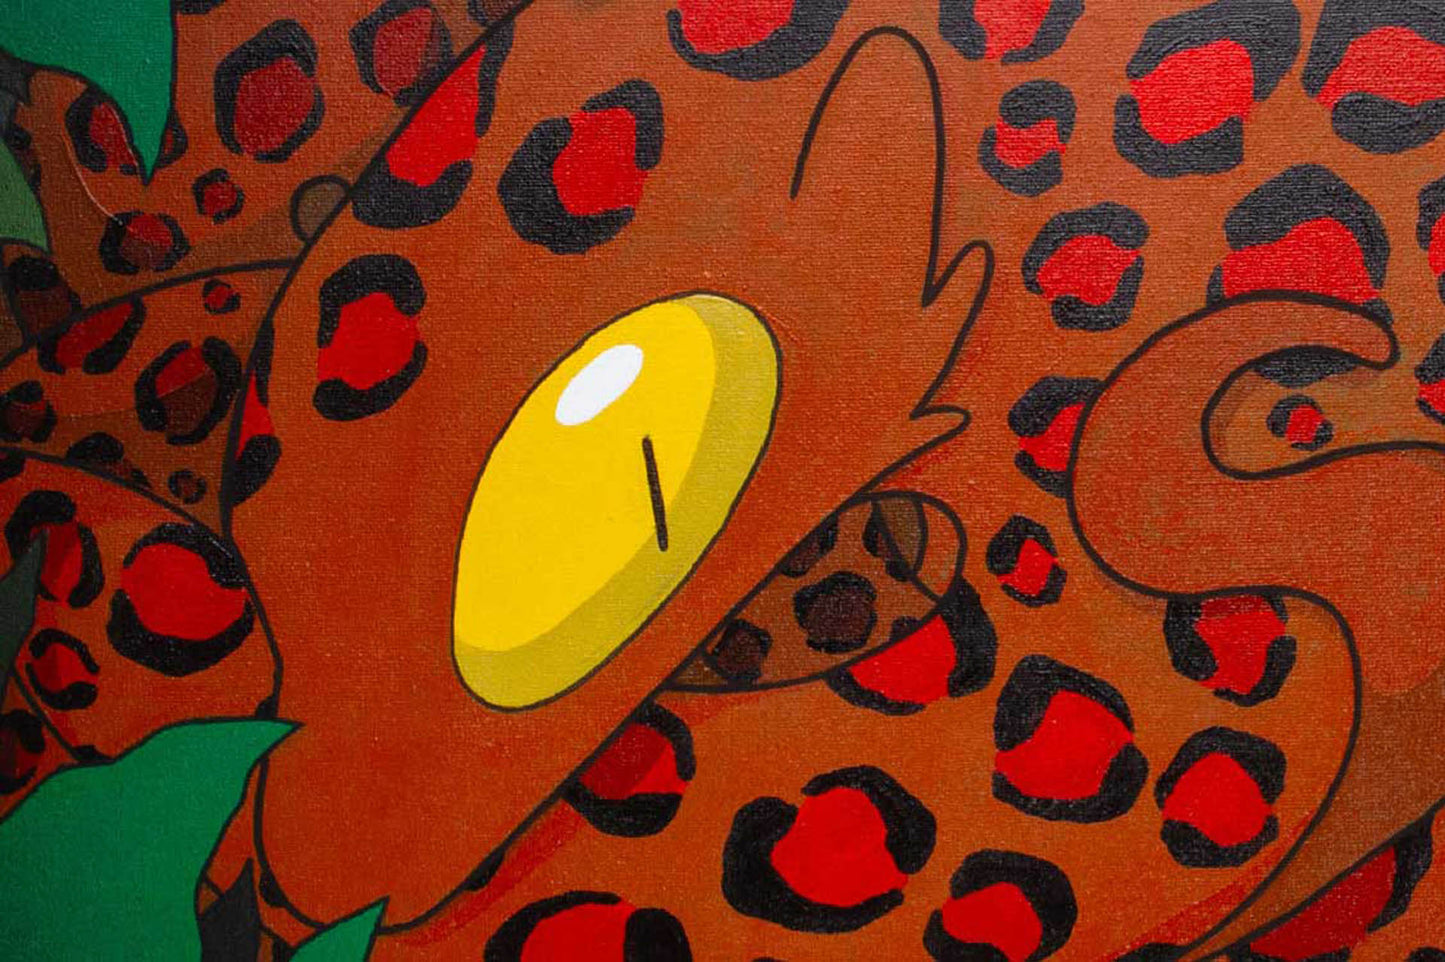 Close-up view of Christian Zeppieri's red lizards painting